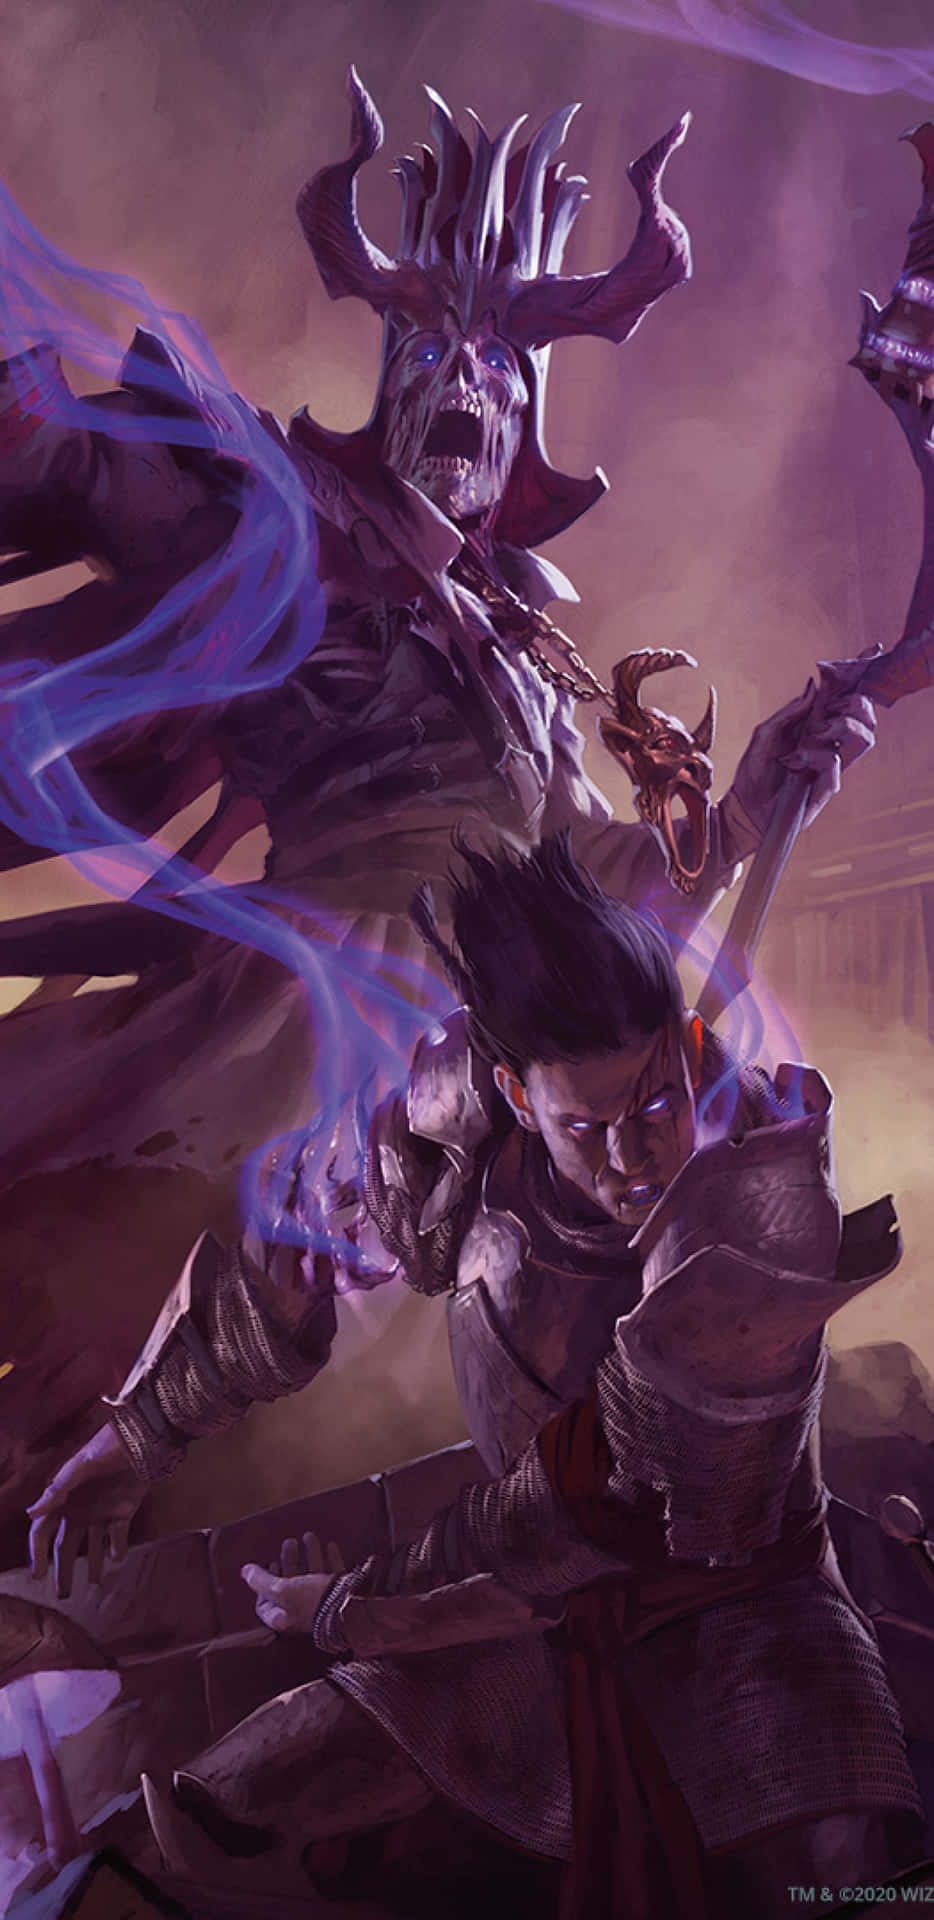 Tap and Summon Your Inner Hero with the Dungeons&Dragons Phone Wallpaper